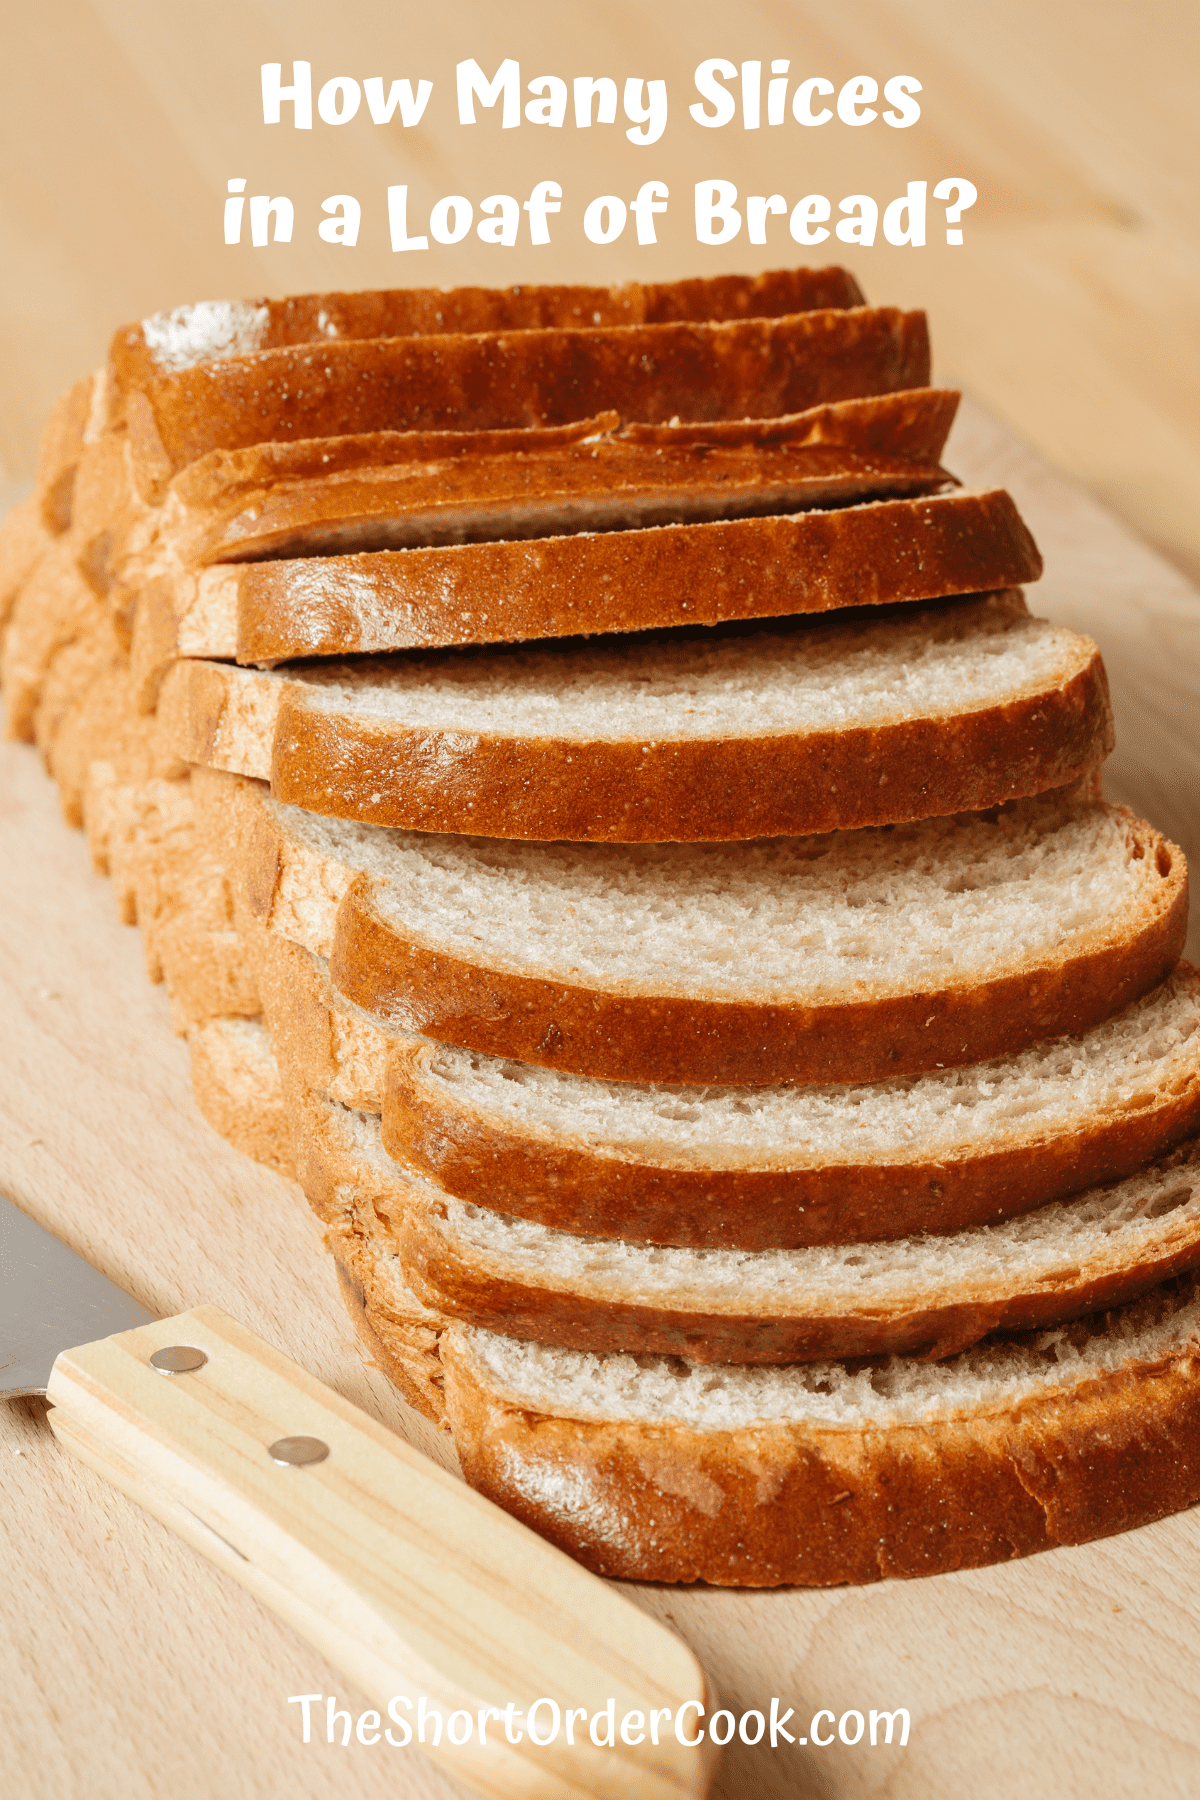 A loaf of bread sliced and stacked.